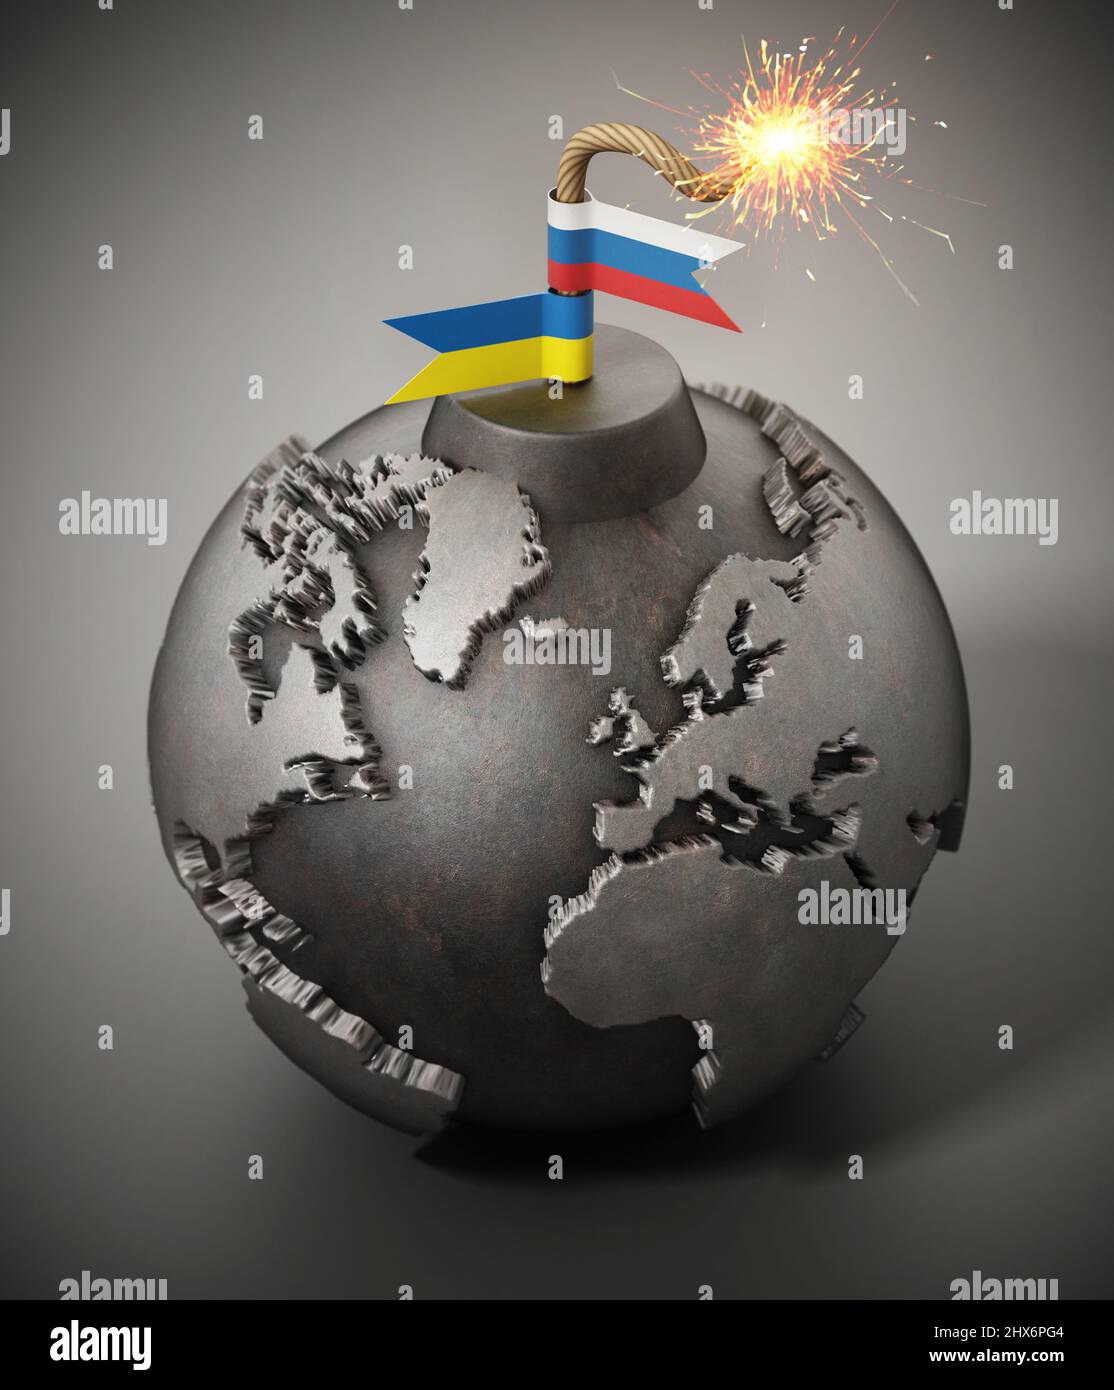 World map shaped bomb with Russia and Ukraine flags as fuse. 3D illustration. Stock Photo